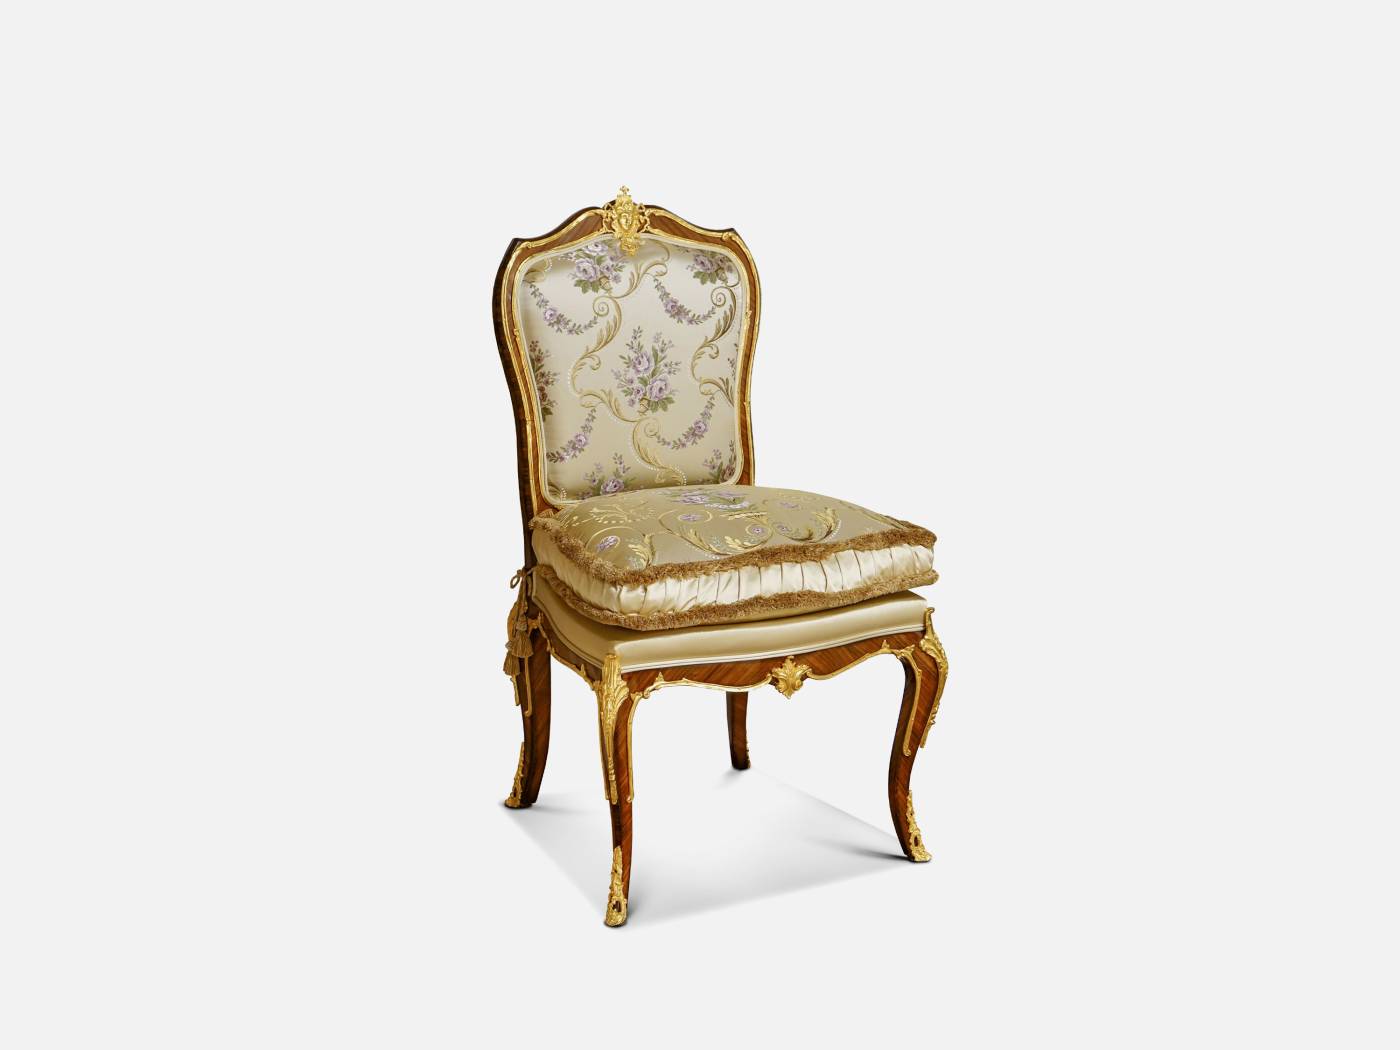 ART. 1094-6 – Discover the elegance of luxury classic Chairs made in Italy by C.G. Capelletti. Luxury classic furniture that combines style and craftsmanship.